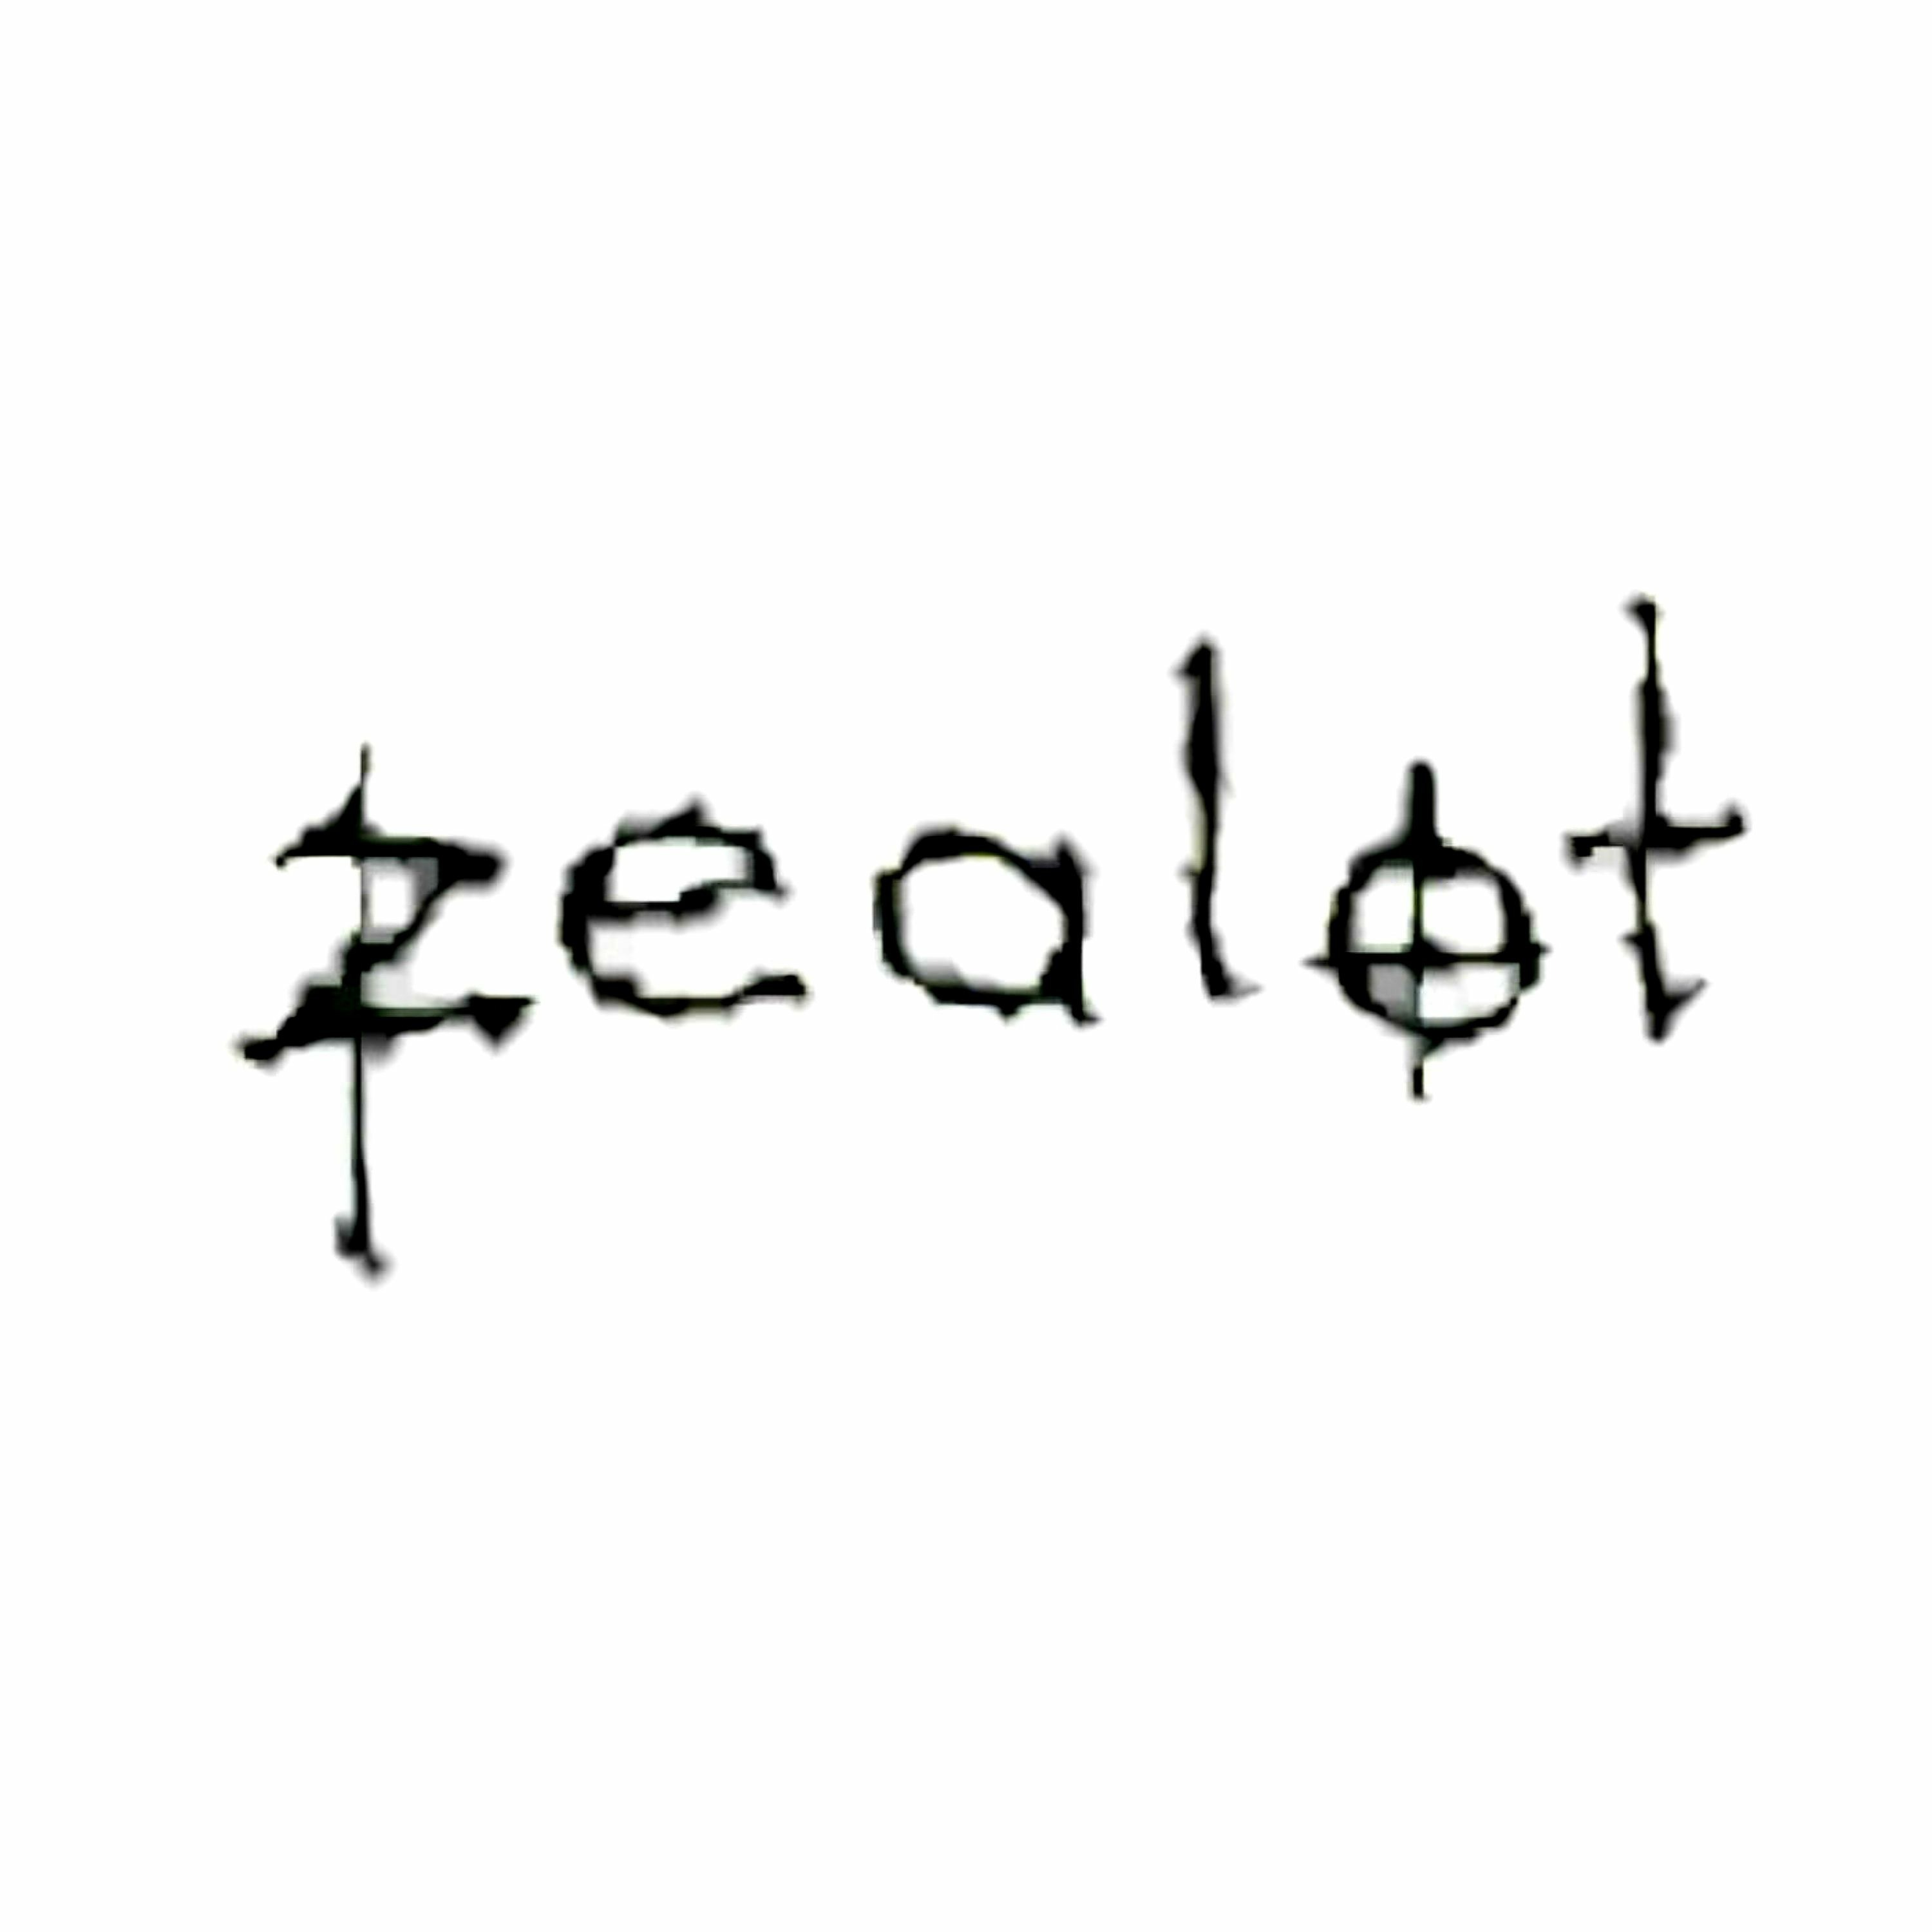 Zealot 29: The Source Family with Simone Holtznagel